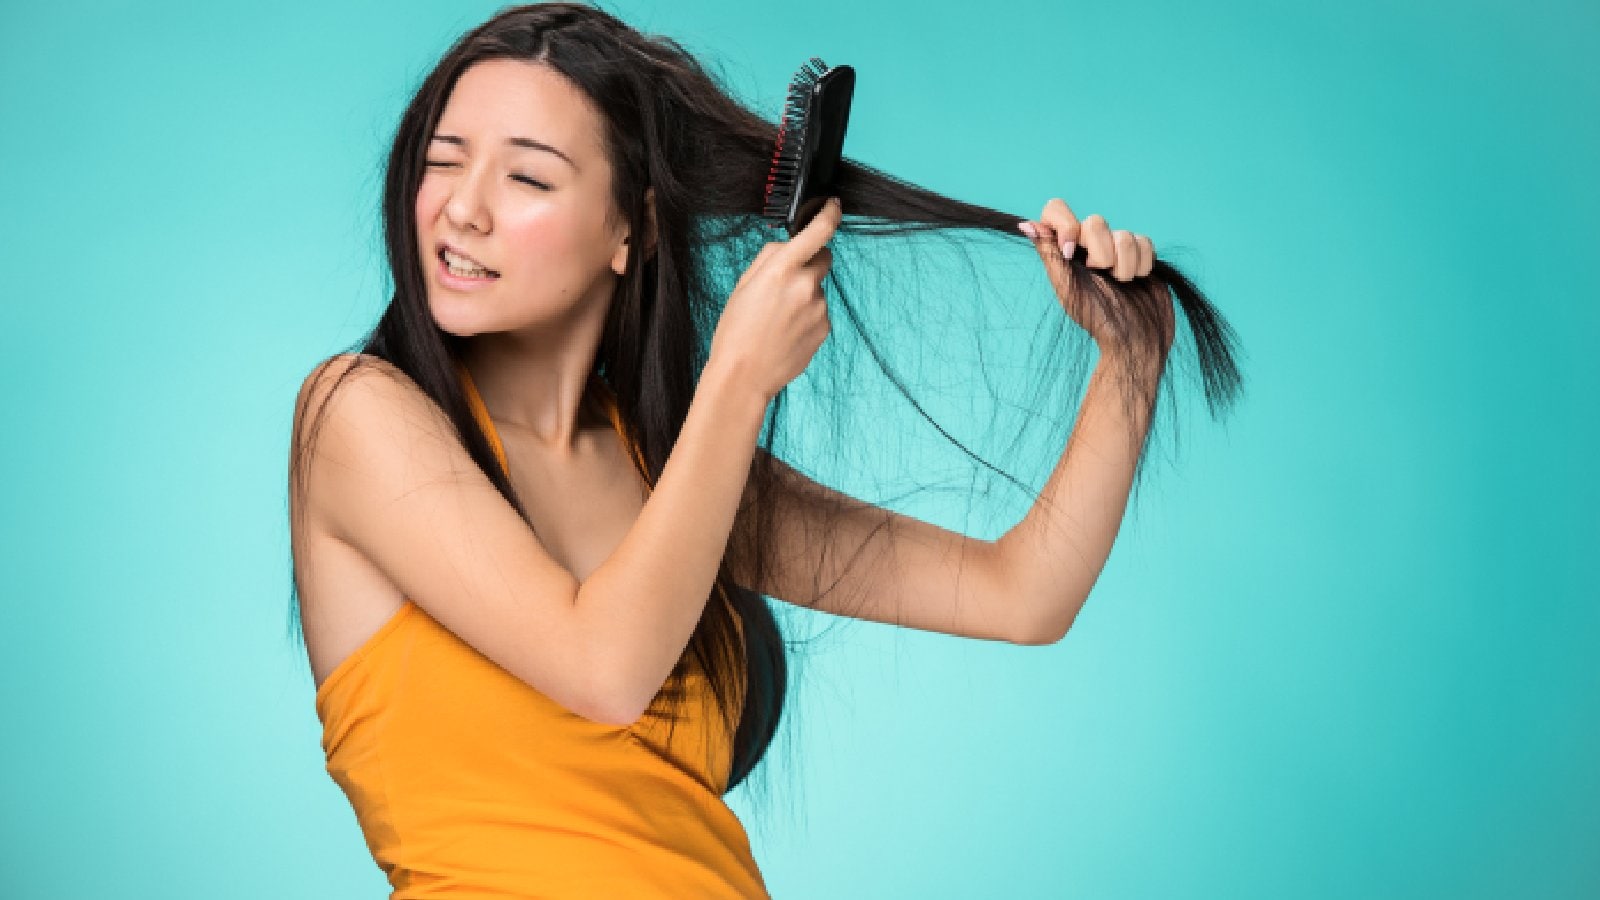 Protein treatment for hair: Benefits and how to do at